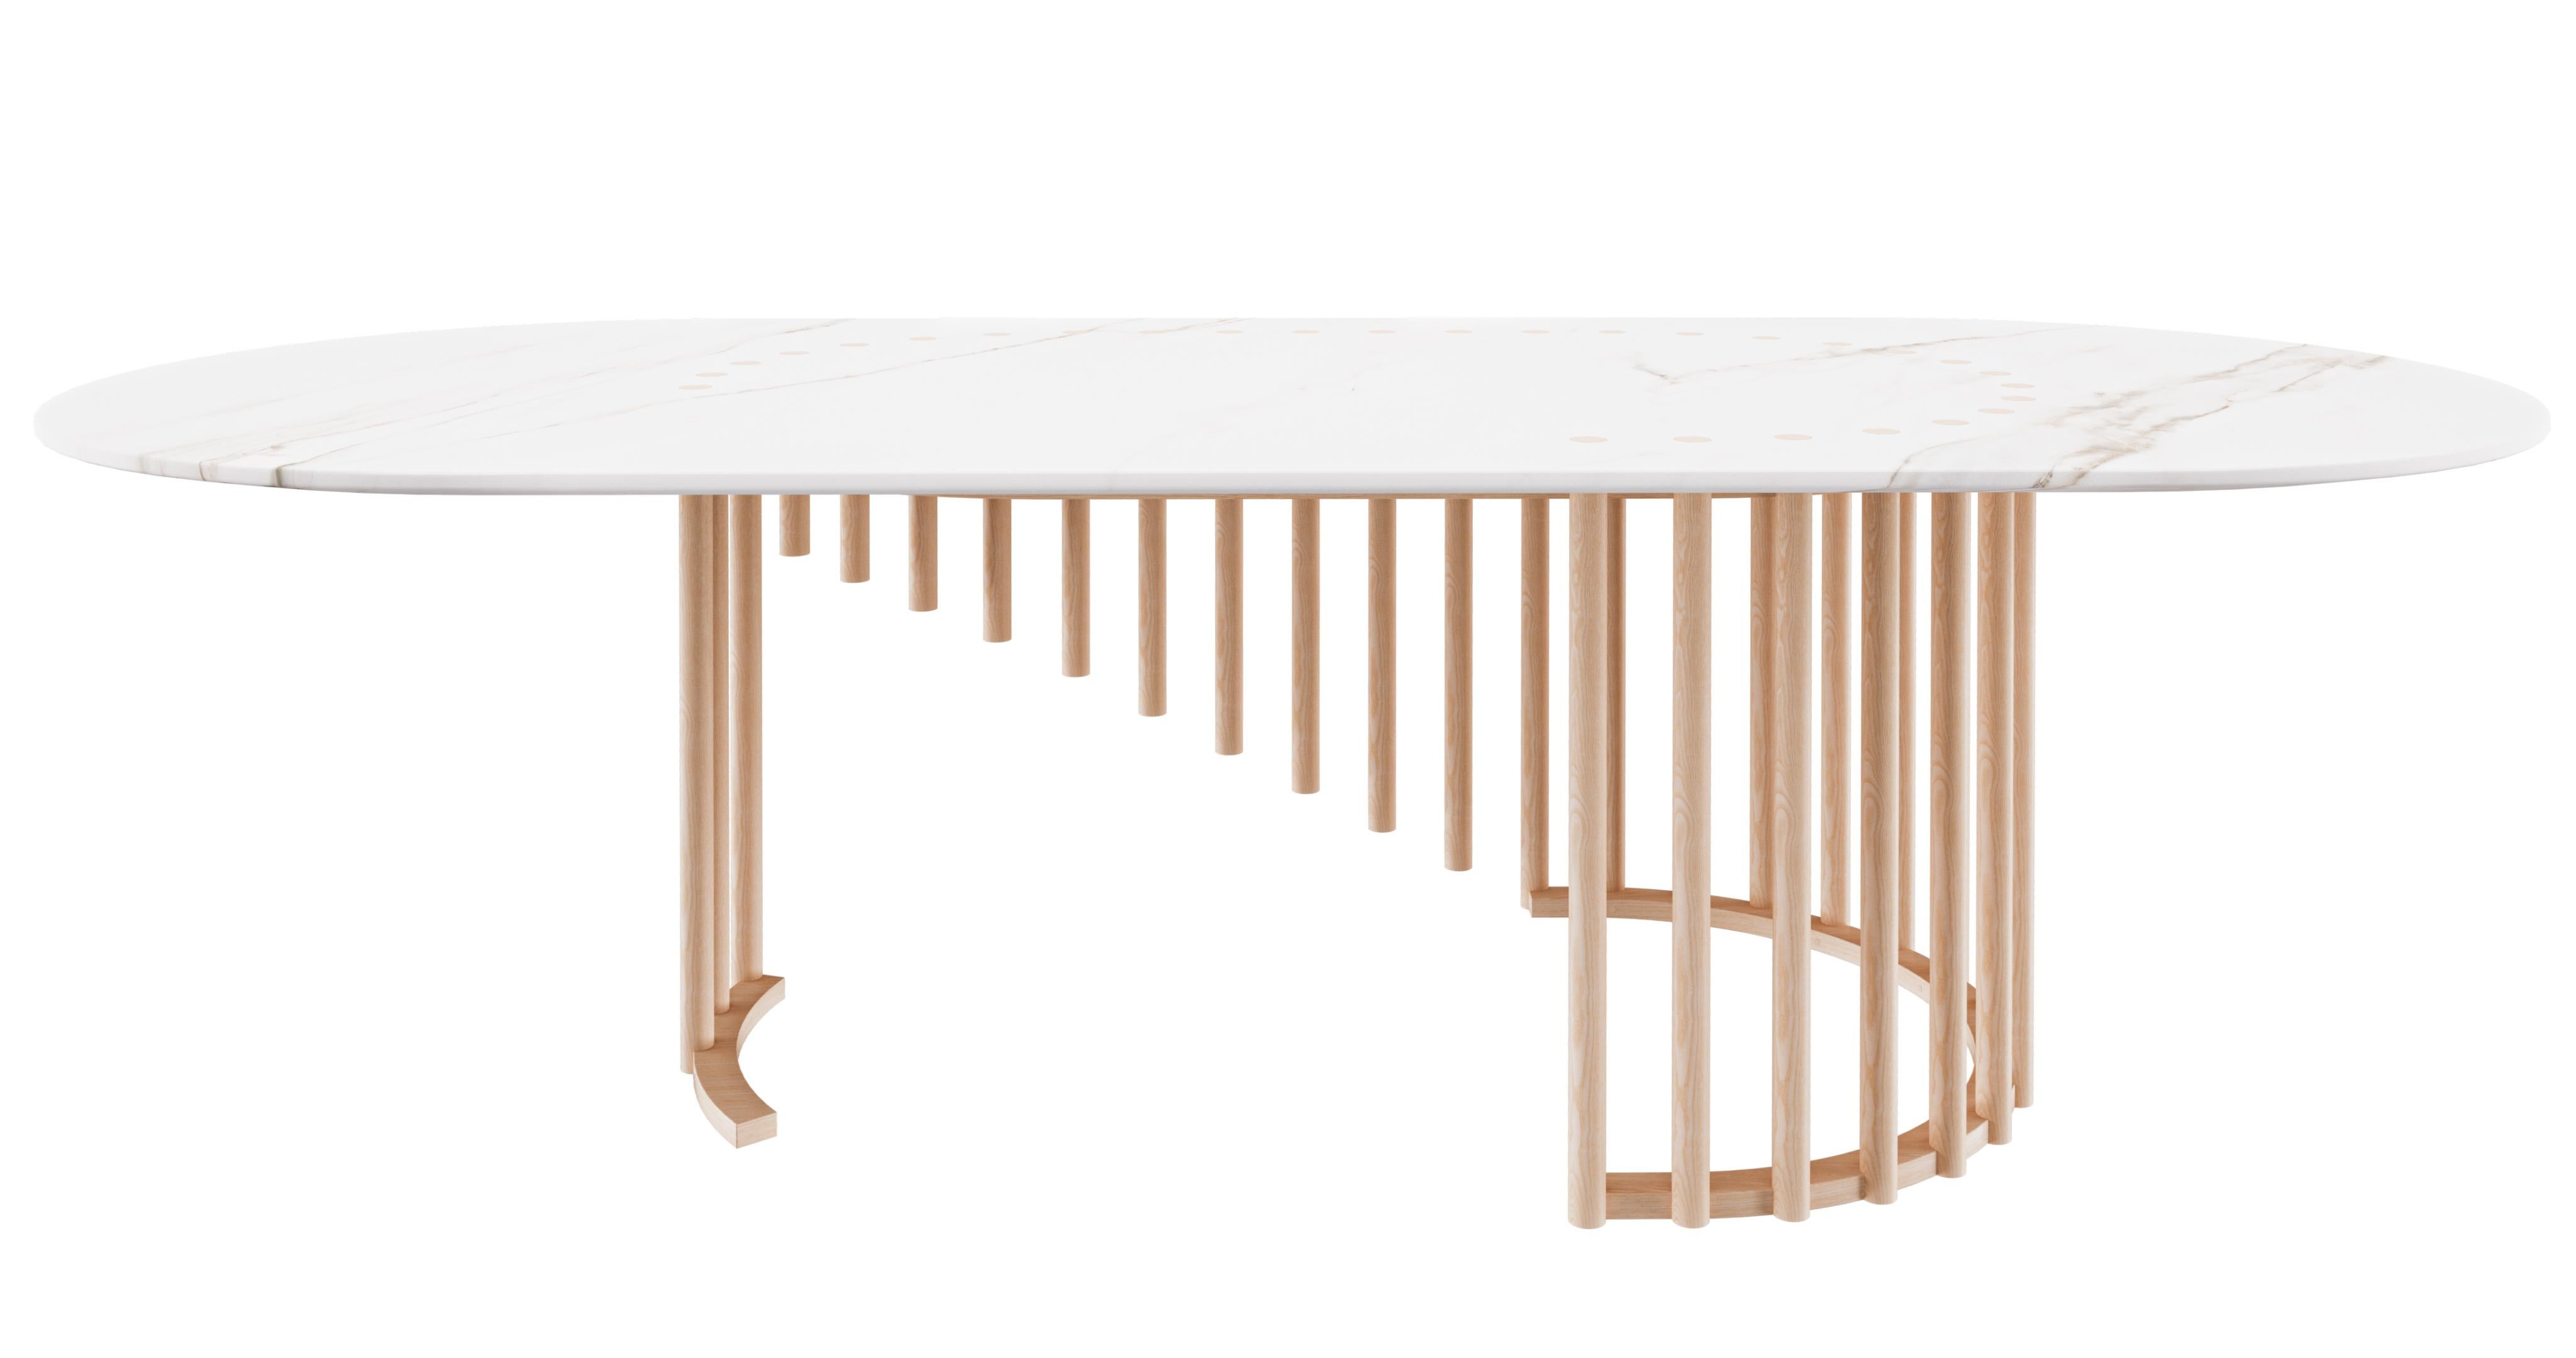 This enchanting ash cocktail table is a tribute to the natural lightness of reed. The bold and luminous ellipsoidal top in white Calacatta marble is gracefully supported by the reed-shaped elements of different lengths that trace the seductive